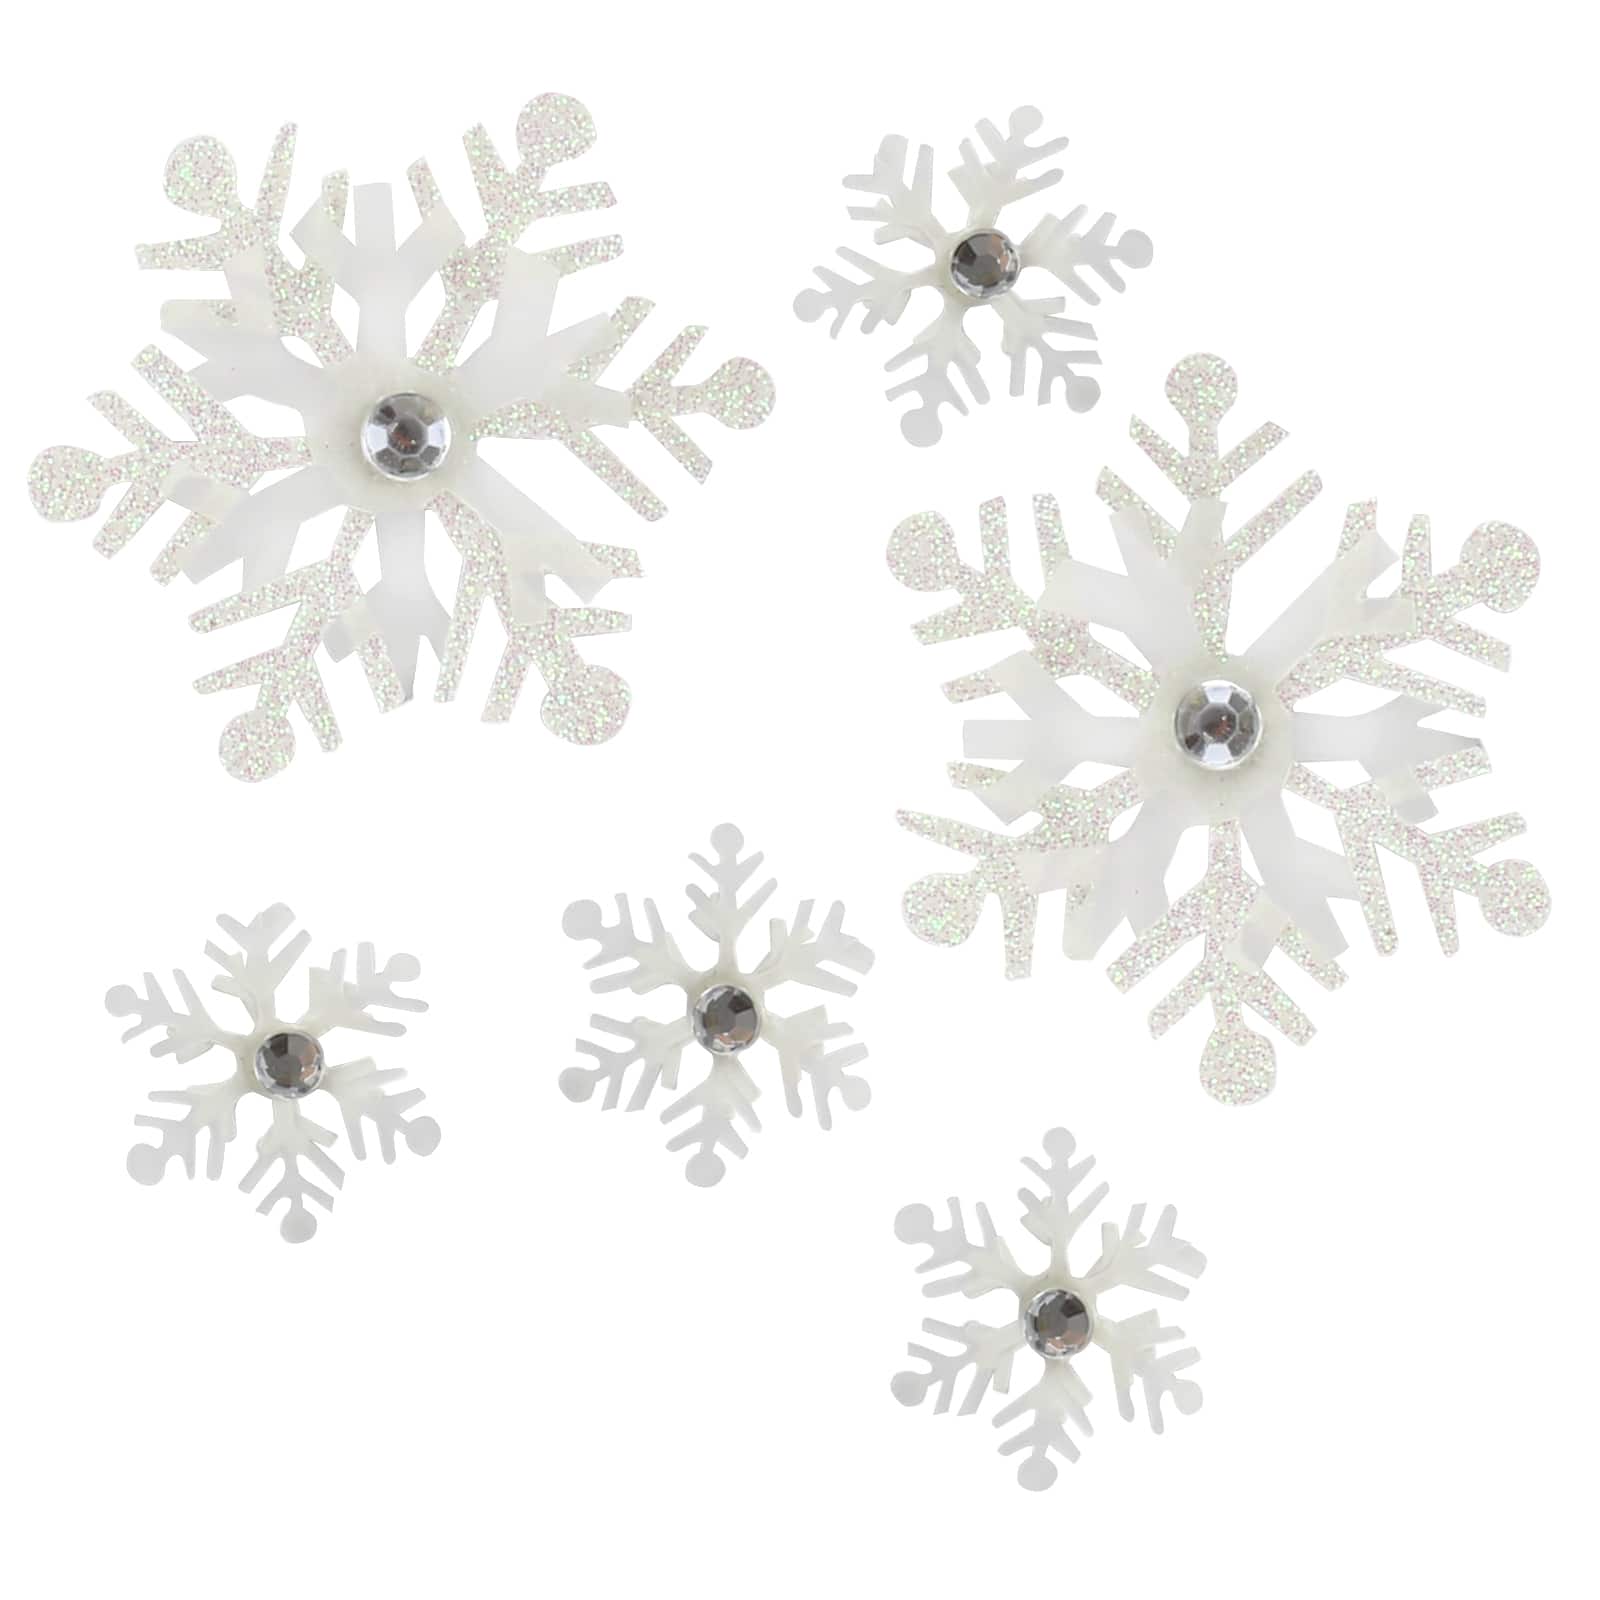 Shop for the Jolee's by You® Snowflake Dimensional Stickers at Michaels